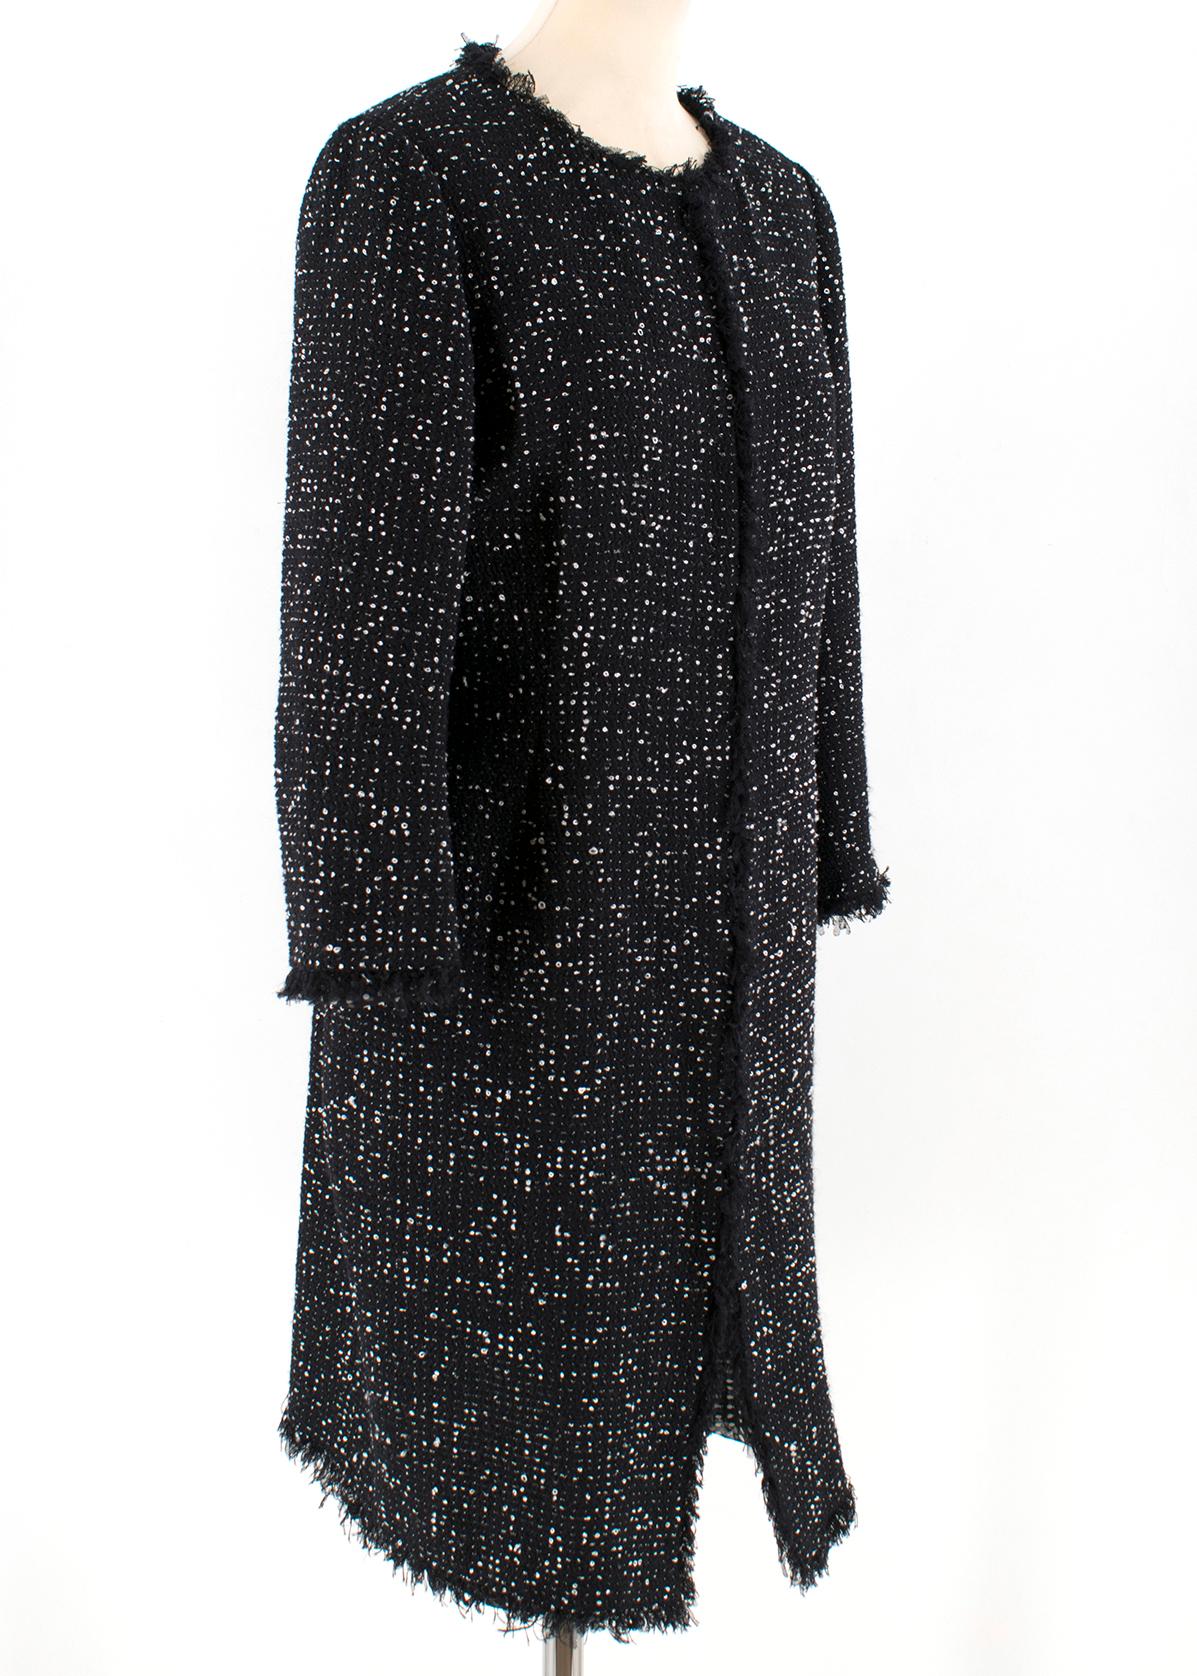 Giambattista Valli Black Boucle Tweed Jacket

- Open-Front Duster
- Black and white tweed
- A self fringe trim 
- Fully lined in silk chiffon
- V-neckline
- Long sleeves
- Hook-and-eye closure

Please note, these items are pre-owned and may show